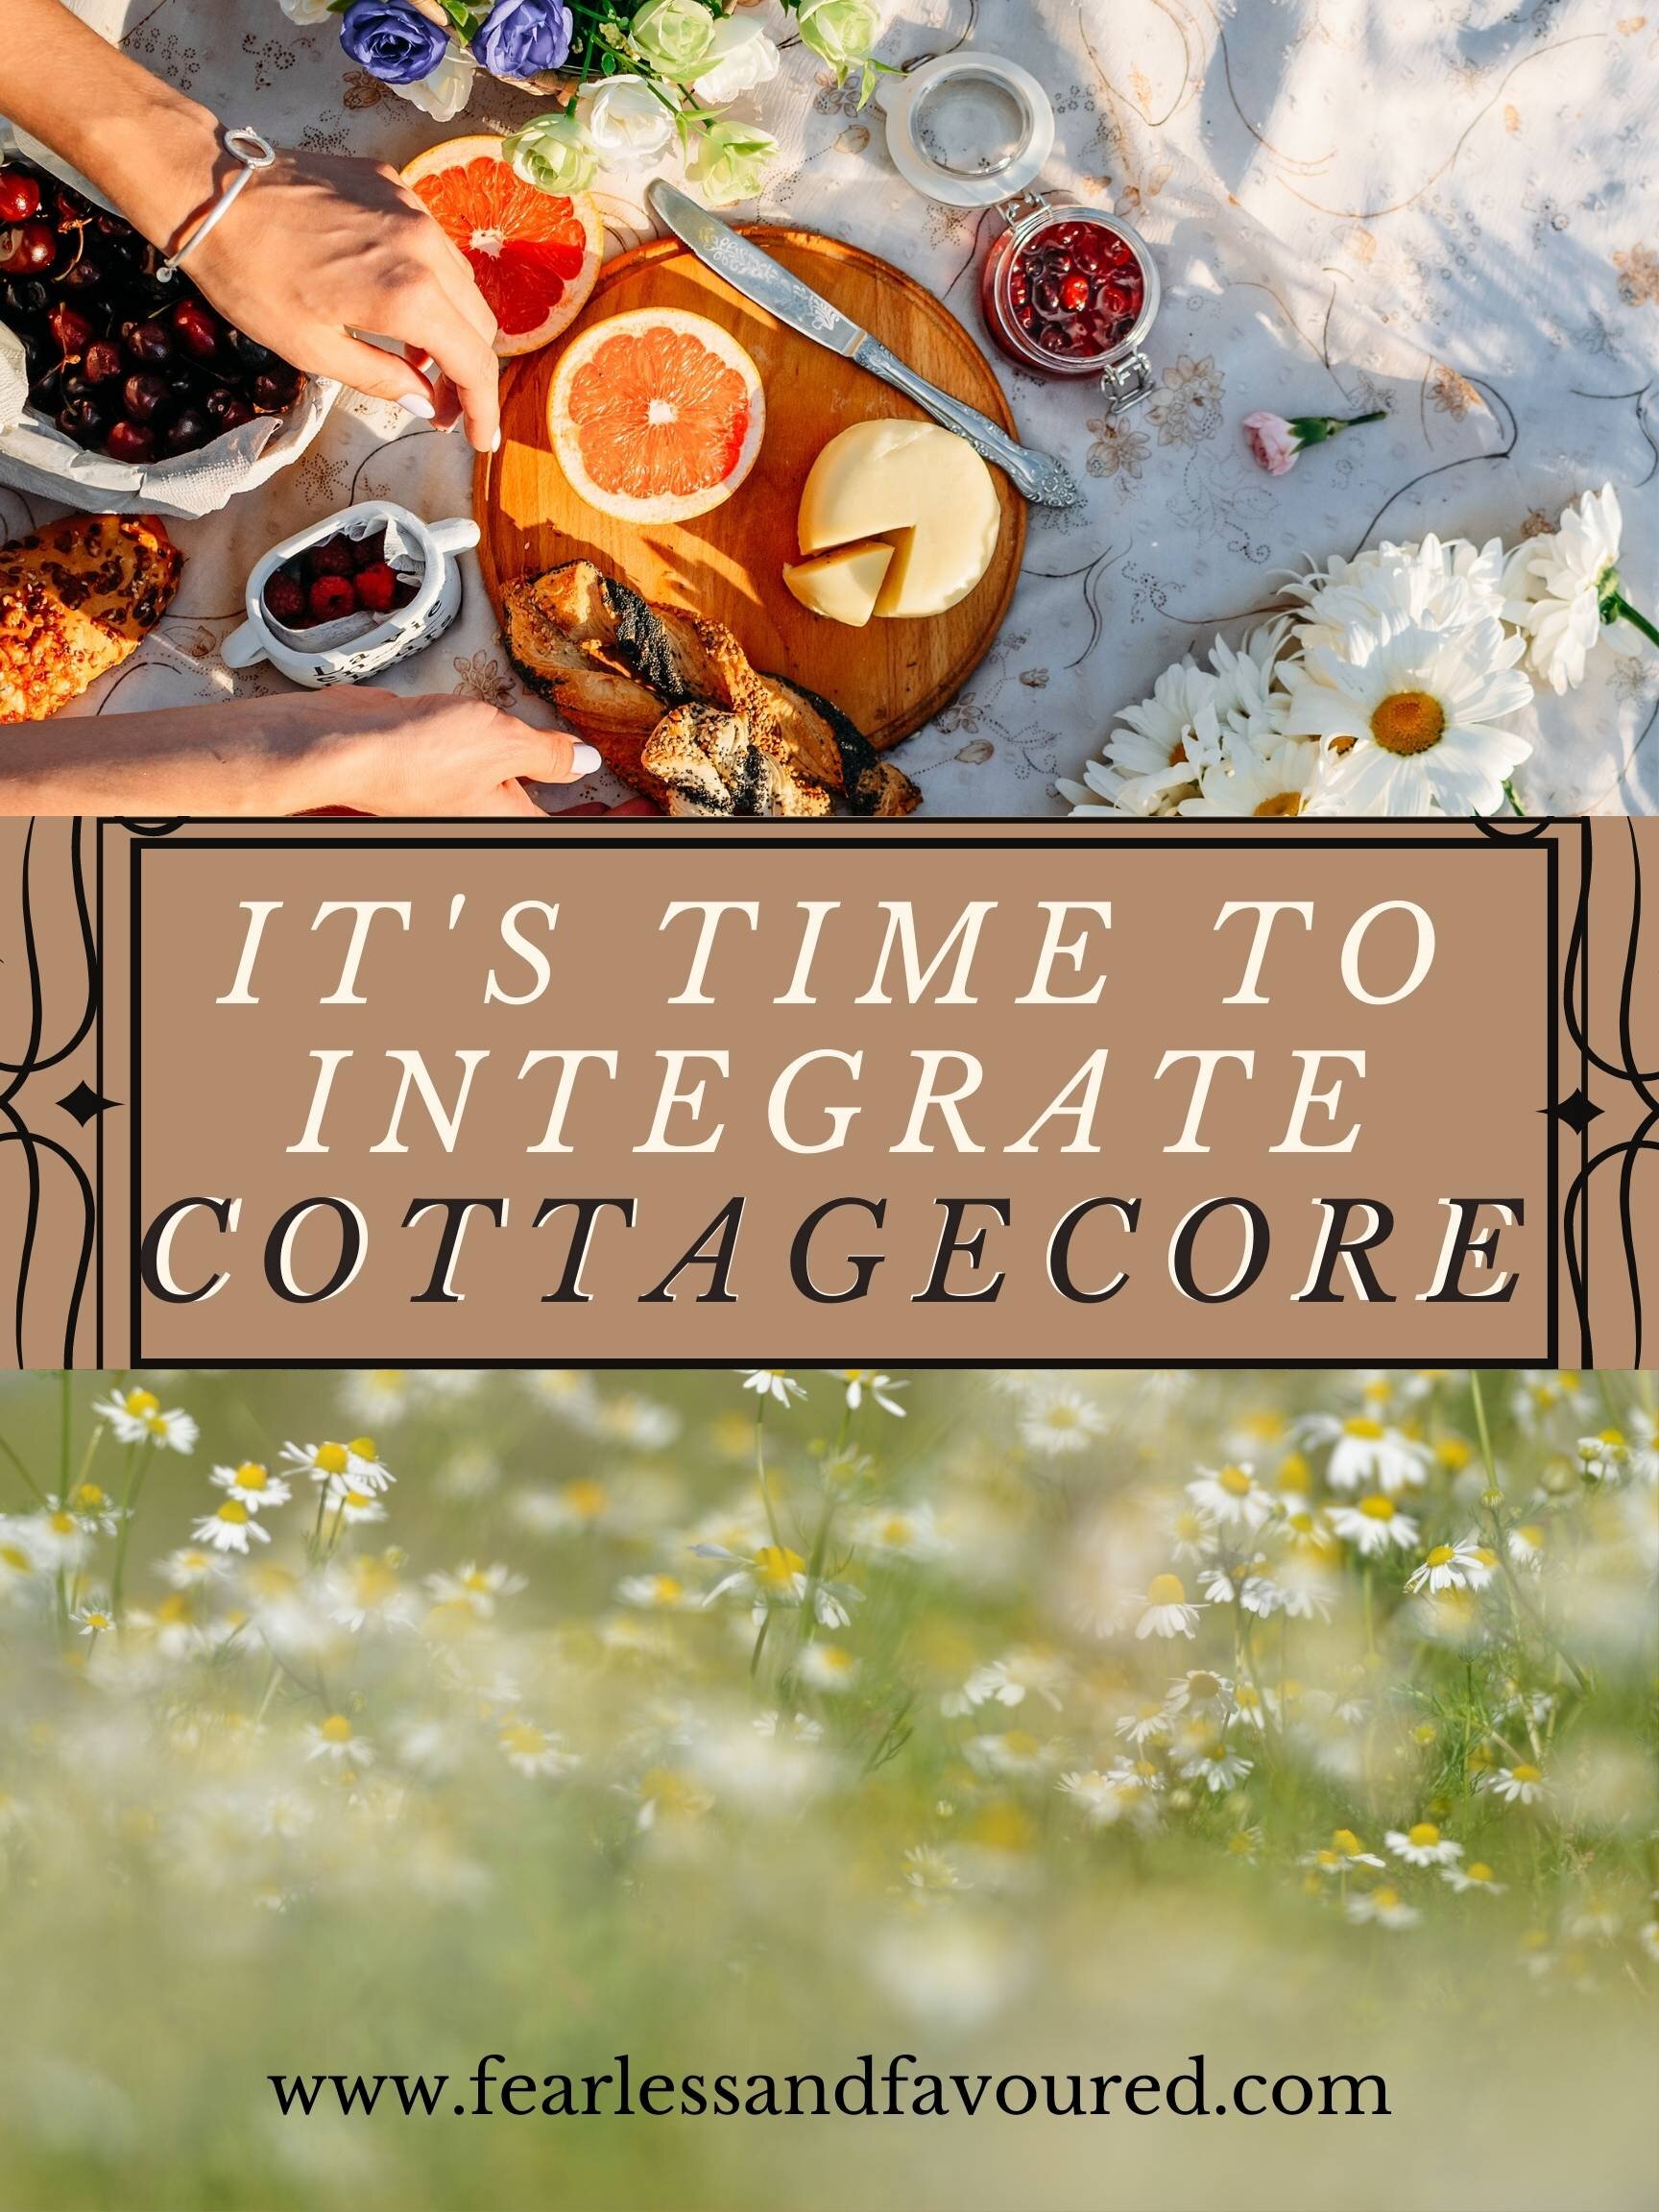 Copy of It's TIme to Integrate Cottagecore.jpg